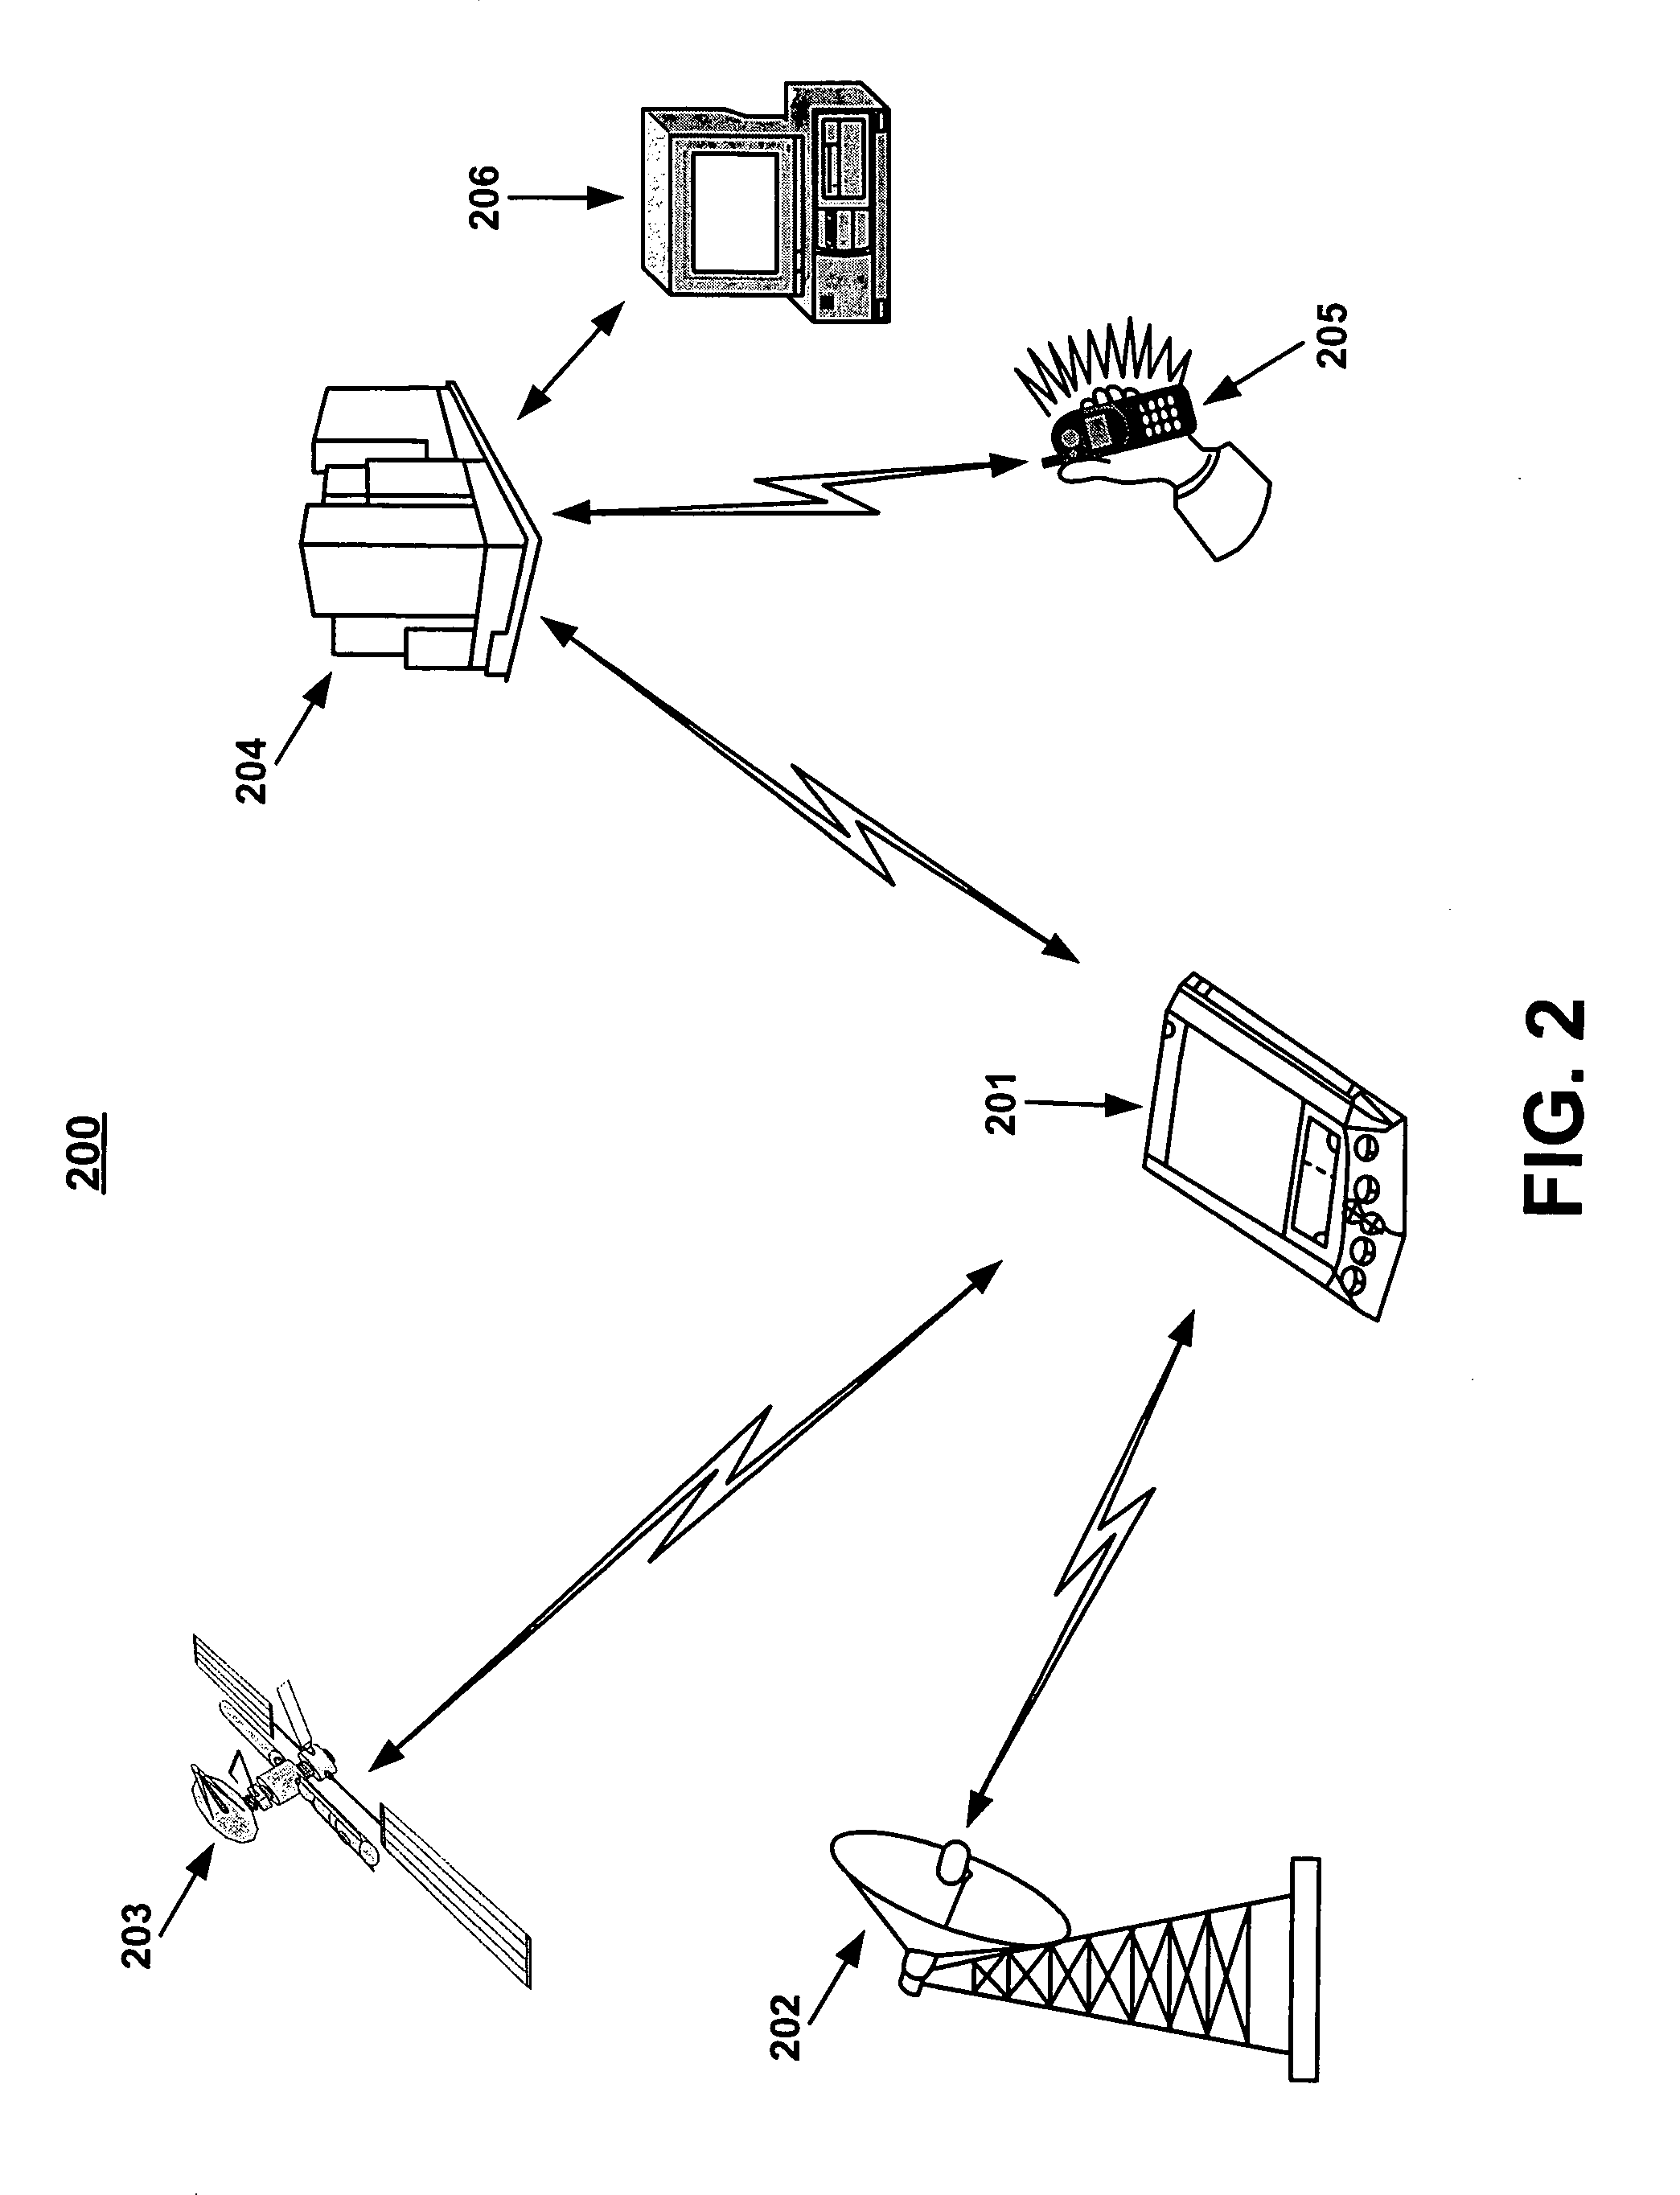 Method and system for controlling an electronic device